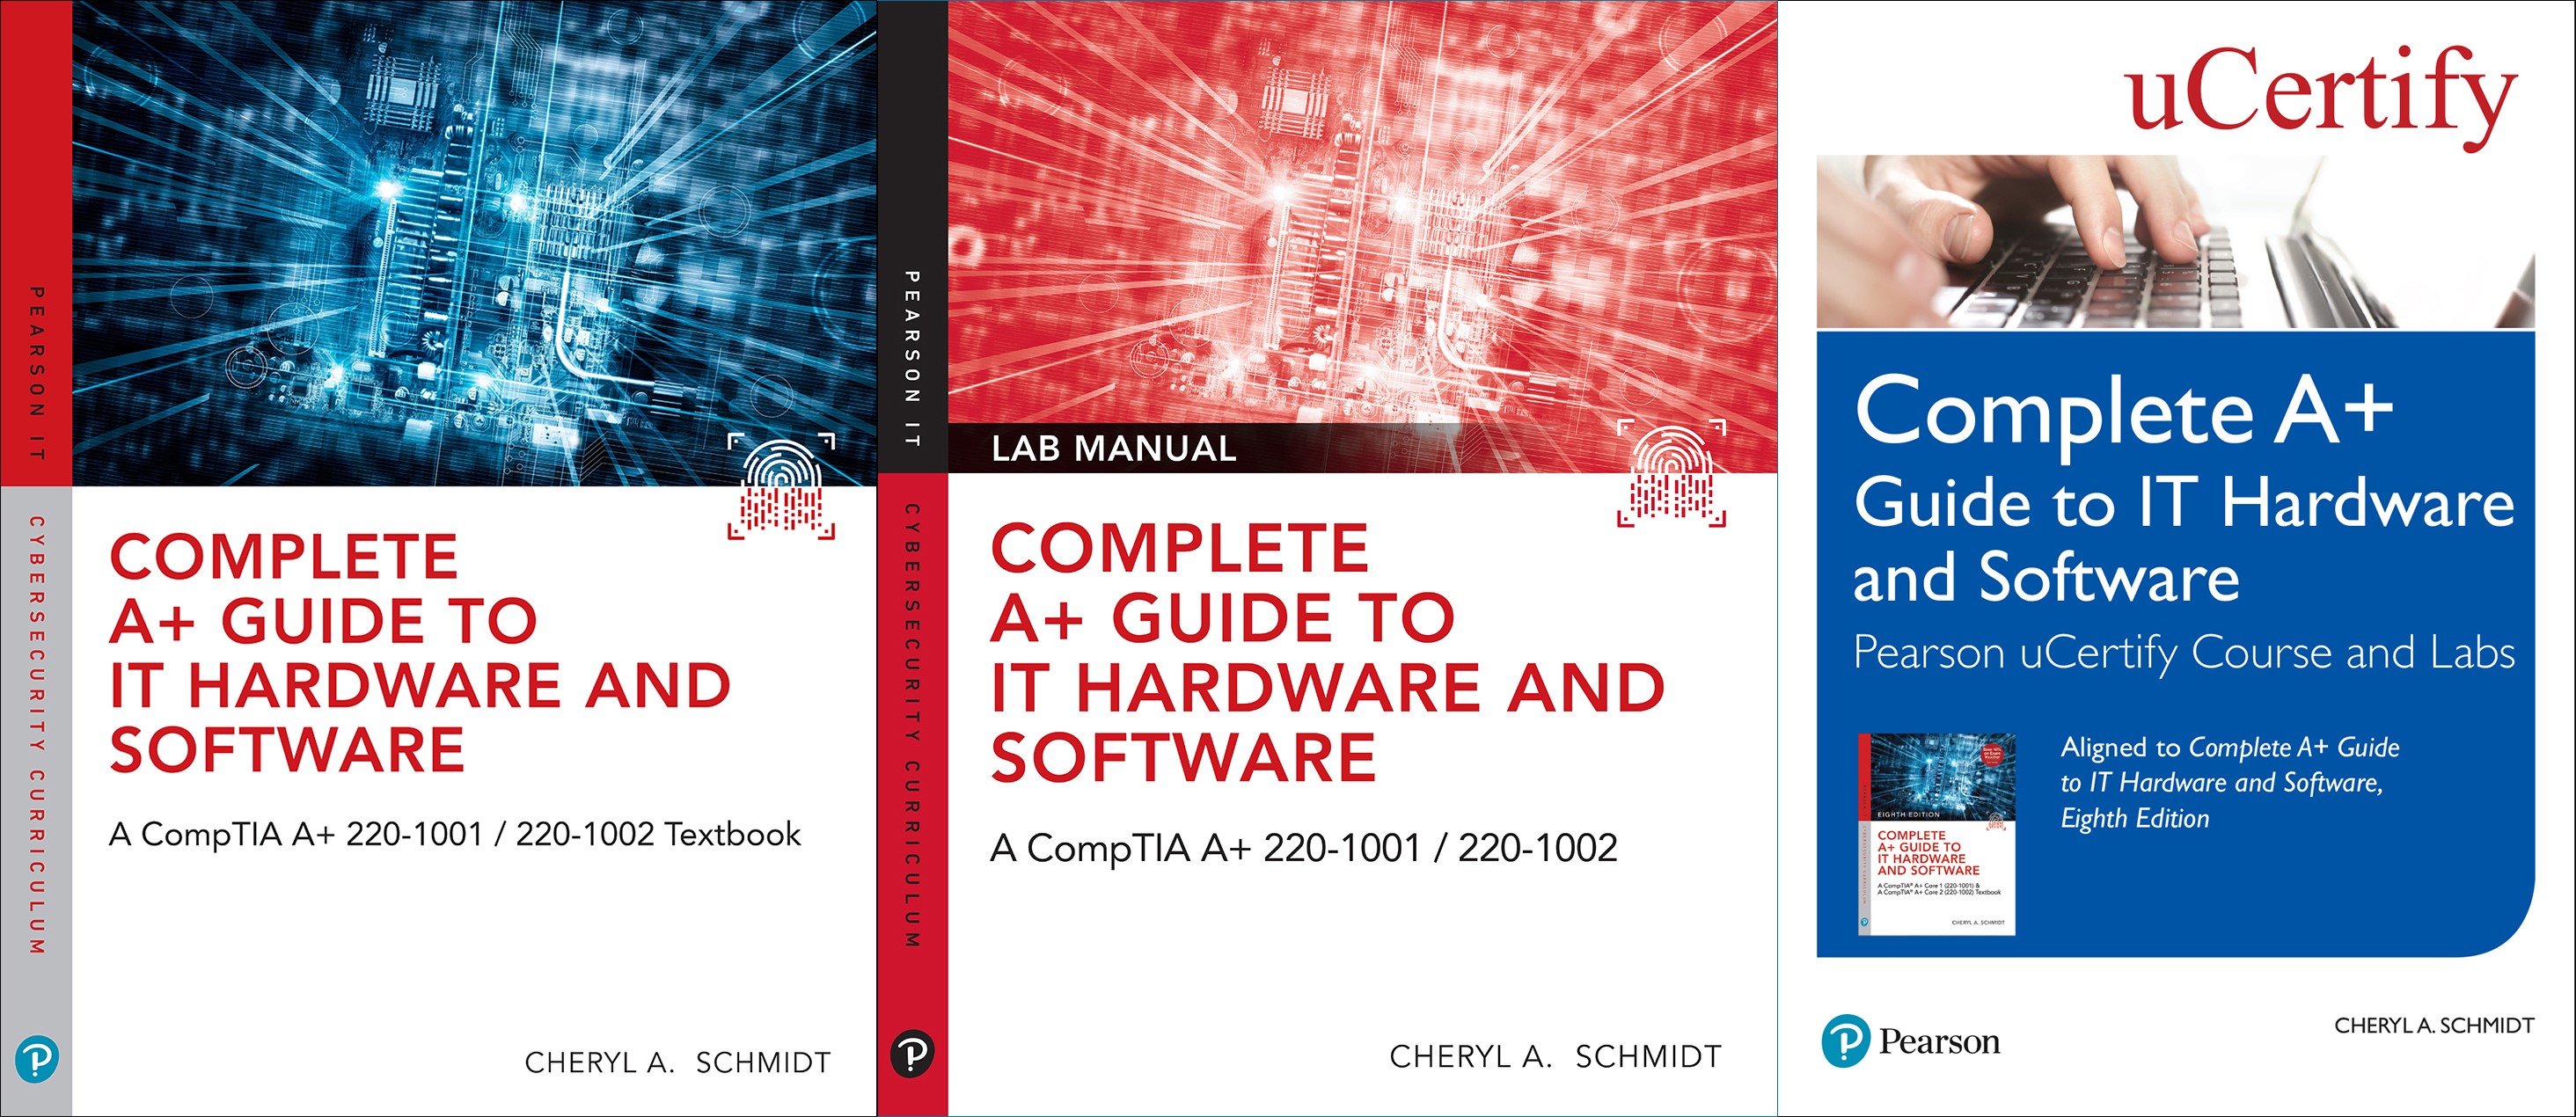 Complete A+ Guide to IT Hardware and Software, 8th Edition Textbook, Lab Manual and uCertify Course and Labs bundle